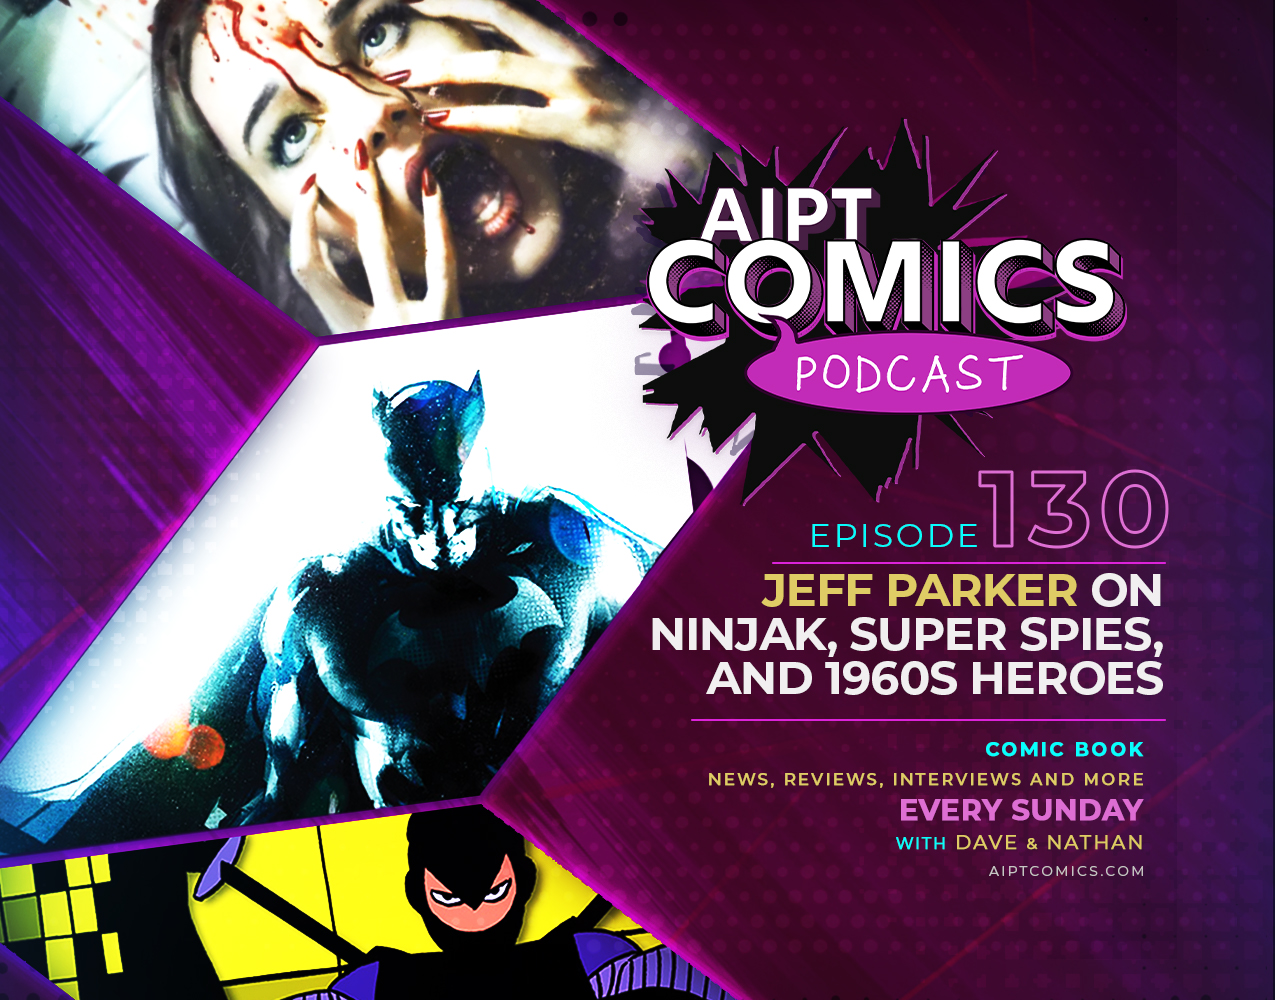 AIPT Comics podcast episode 130: Jeff Parker on 'Ninjak,' super spies, and 1960s heroes